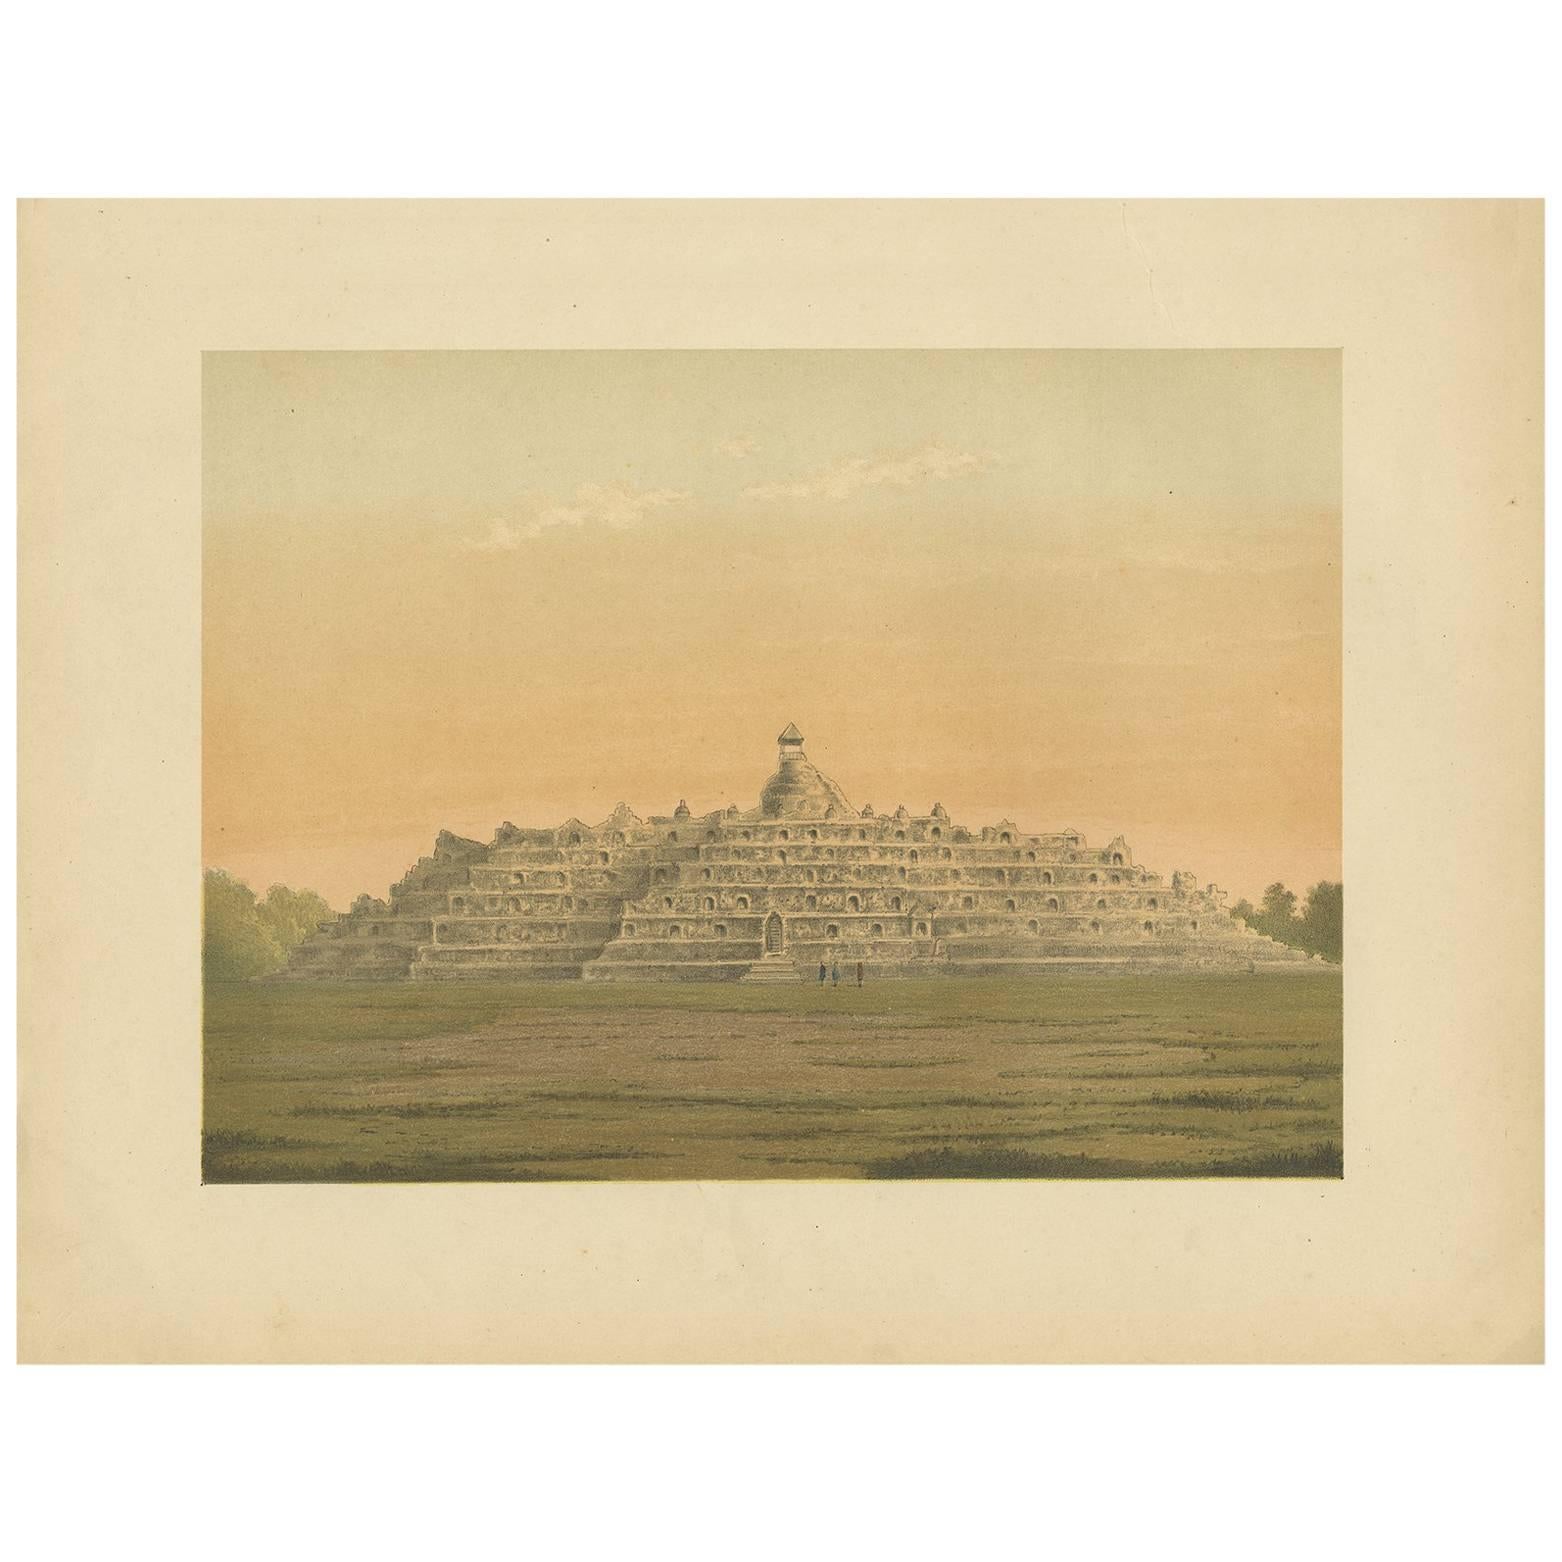 Antique Print of the Borobudur Temple on Java by M.T.H. Perelaer, 1888